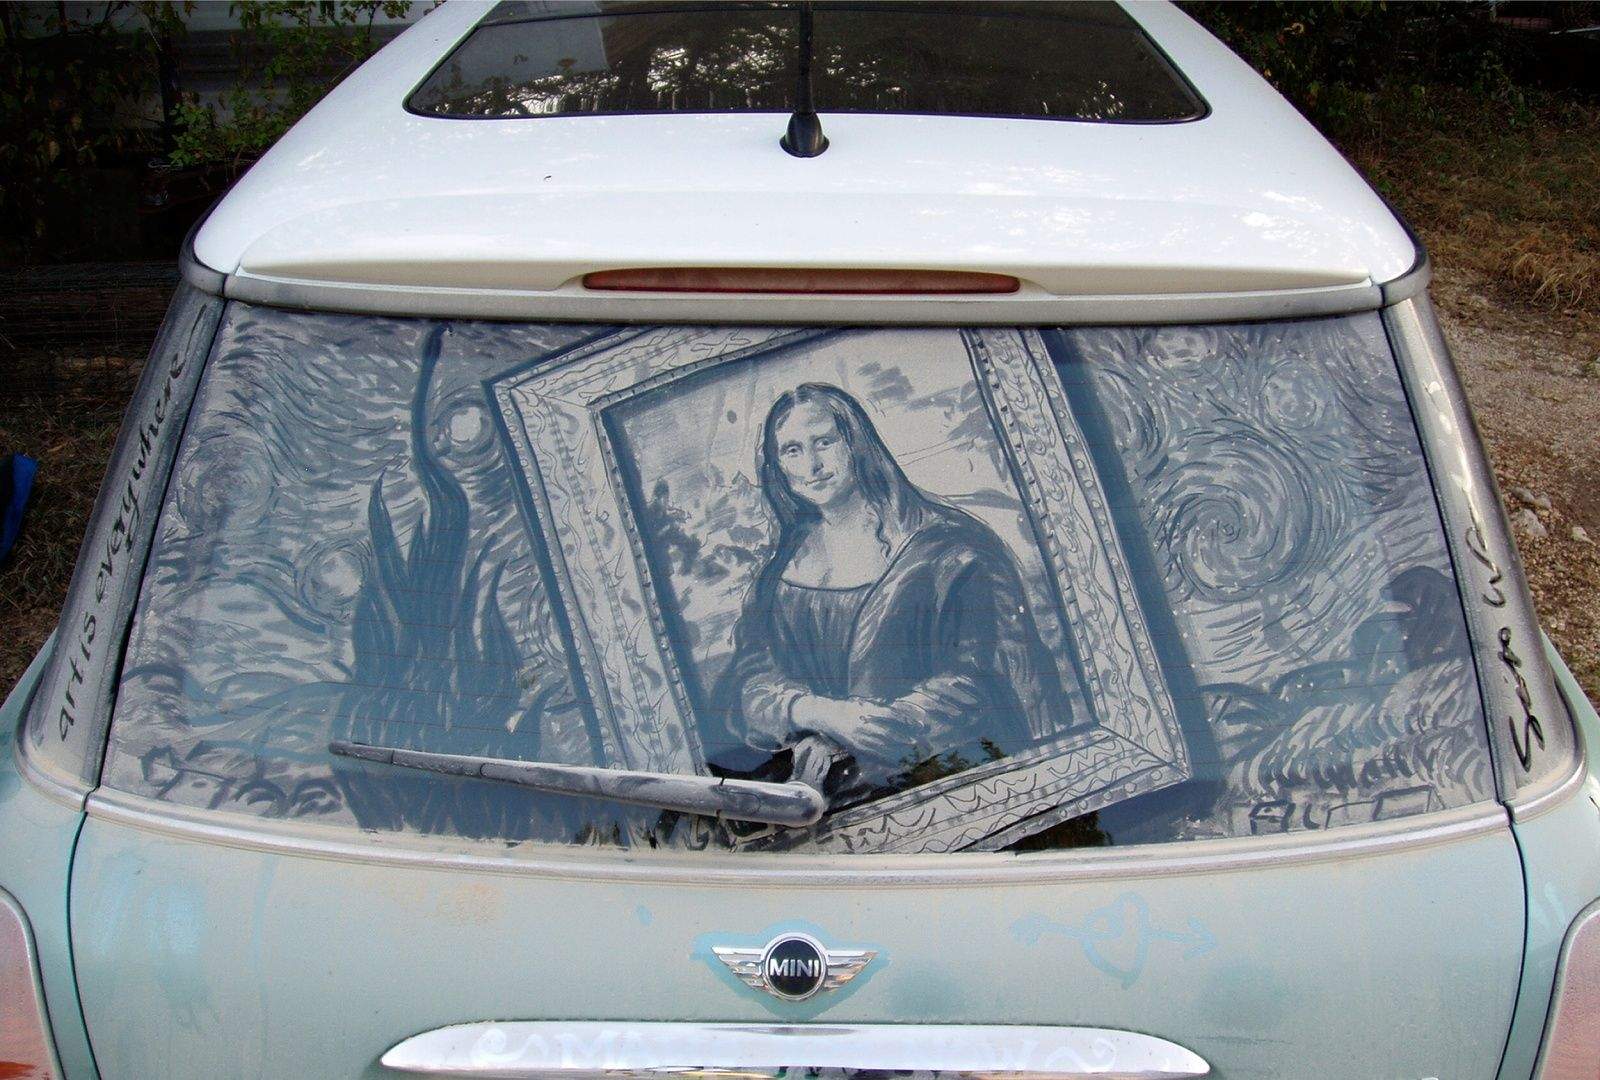 One person's dirty car window is Scott Wade's canvass. Wade found a museum mashup - Mona Lisa and Starry Night - on this dirty window. Photo courtesy of Scott Wade